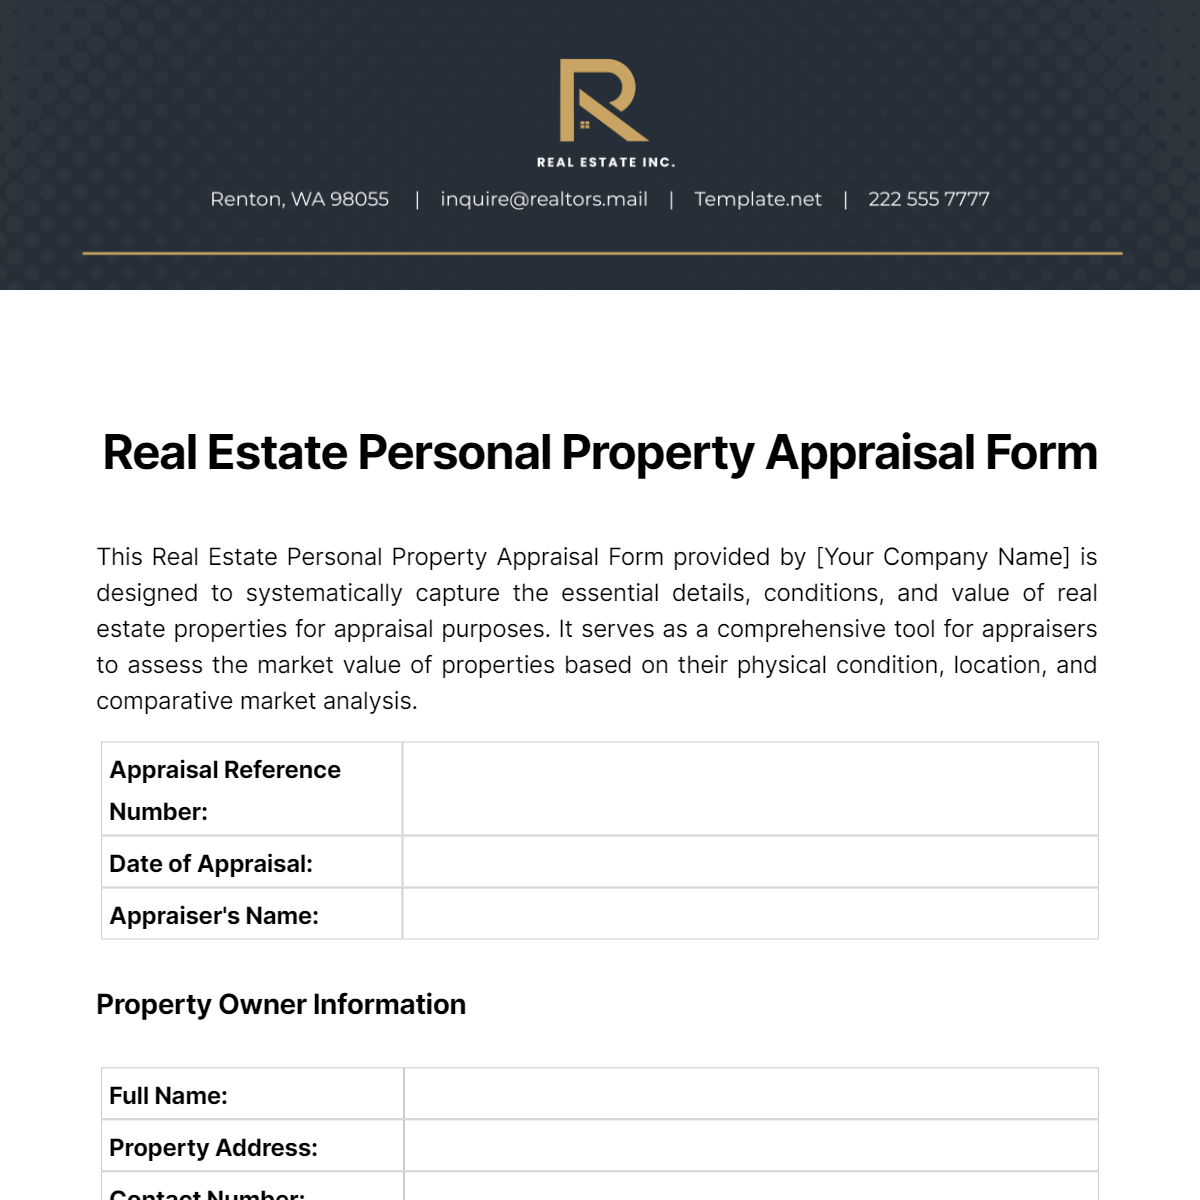 Real Estate Personal Property Appraisal Form Template